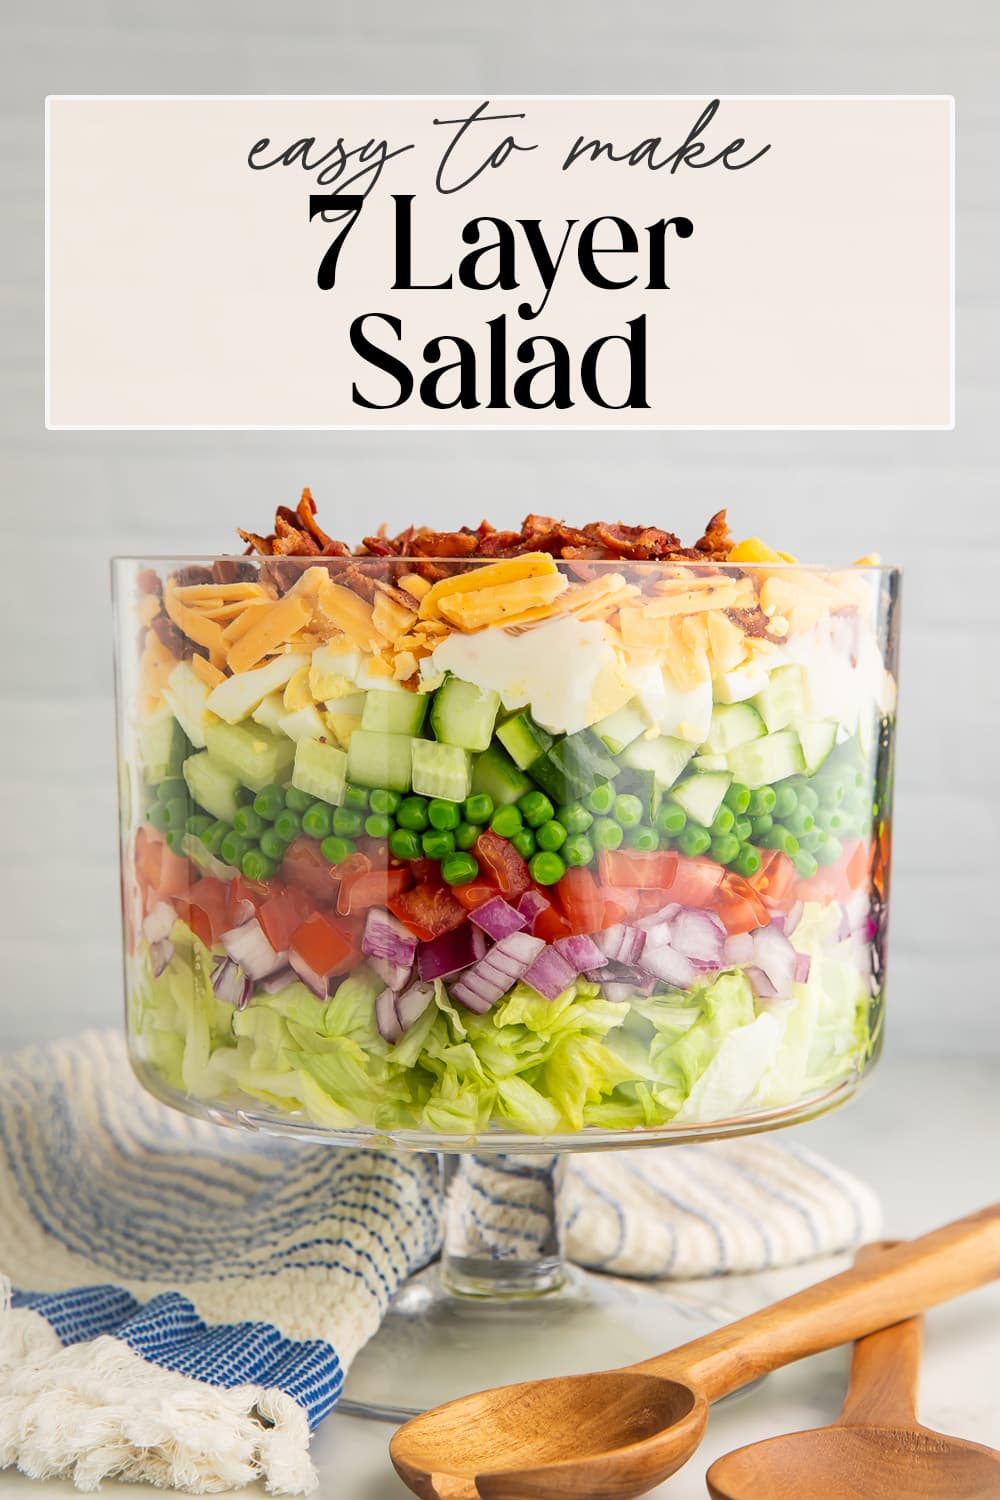 Pin graphic for 7 layer salad.